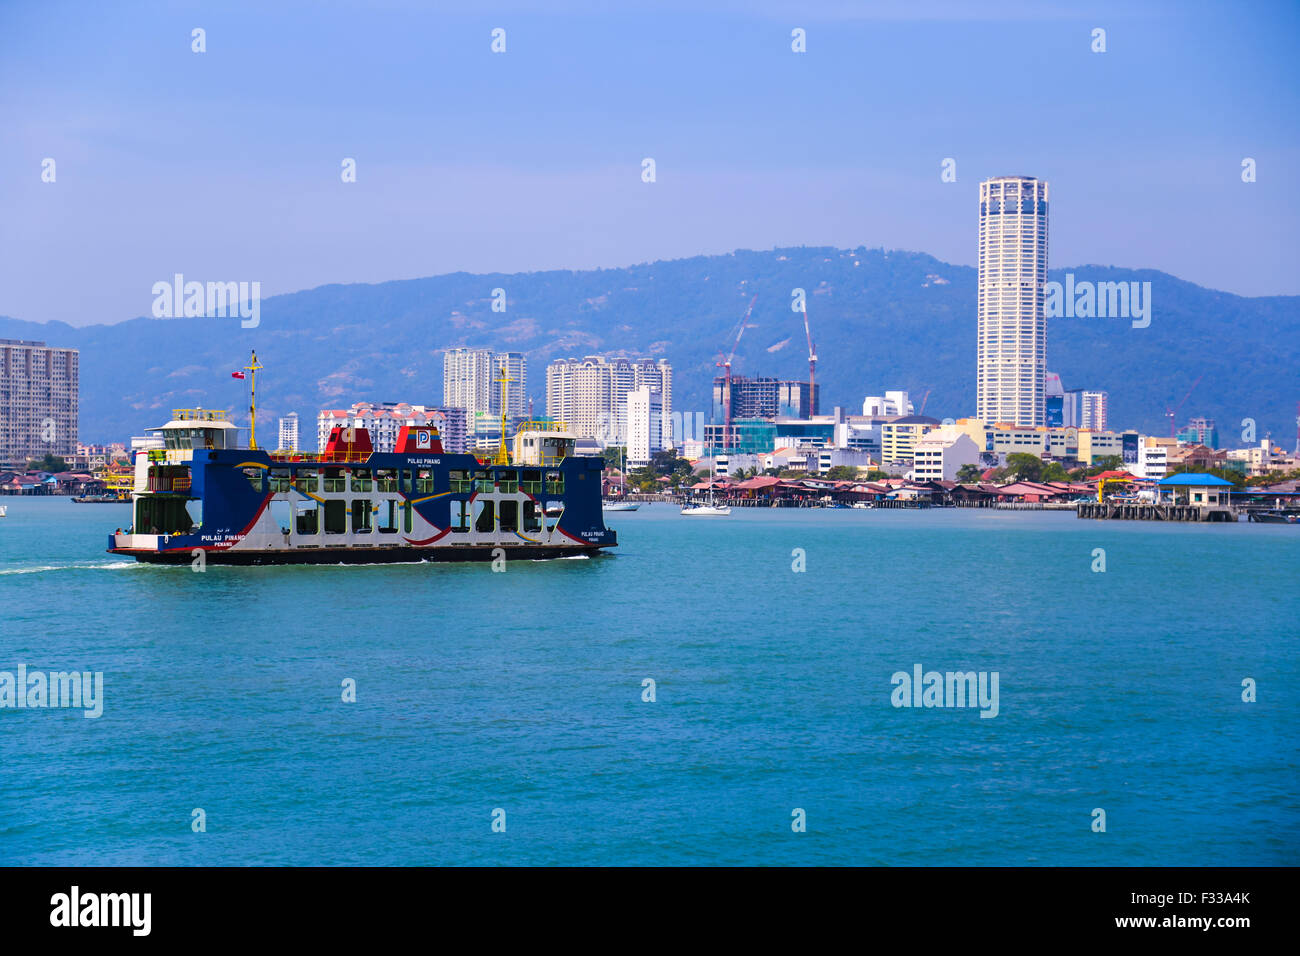 Passengers ferry of Penang island, Malaysia is one of Penang tourism